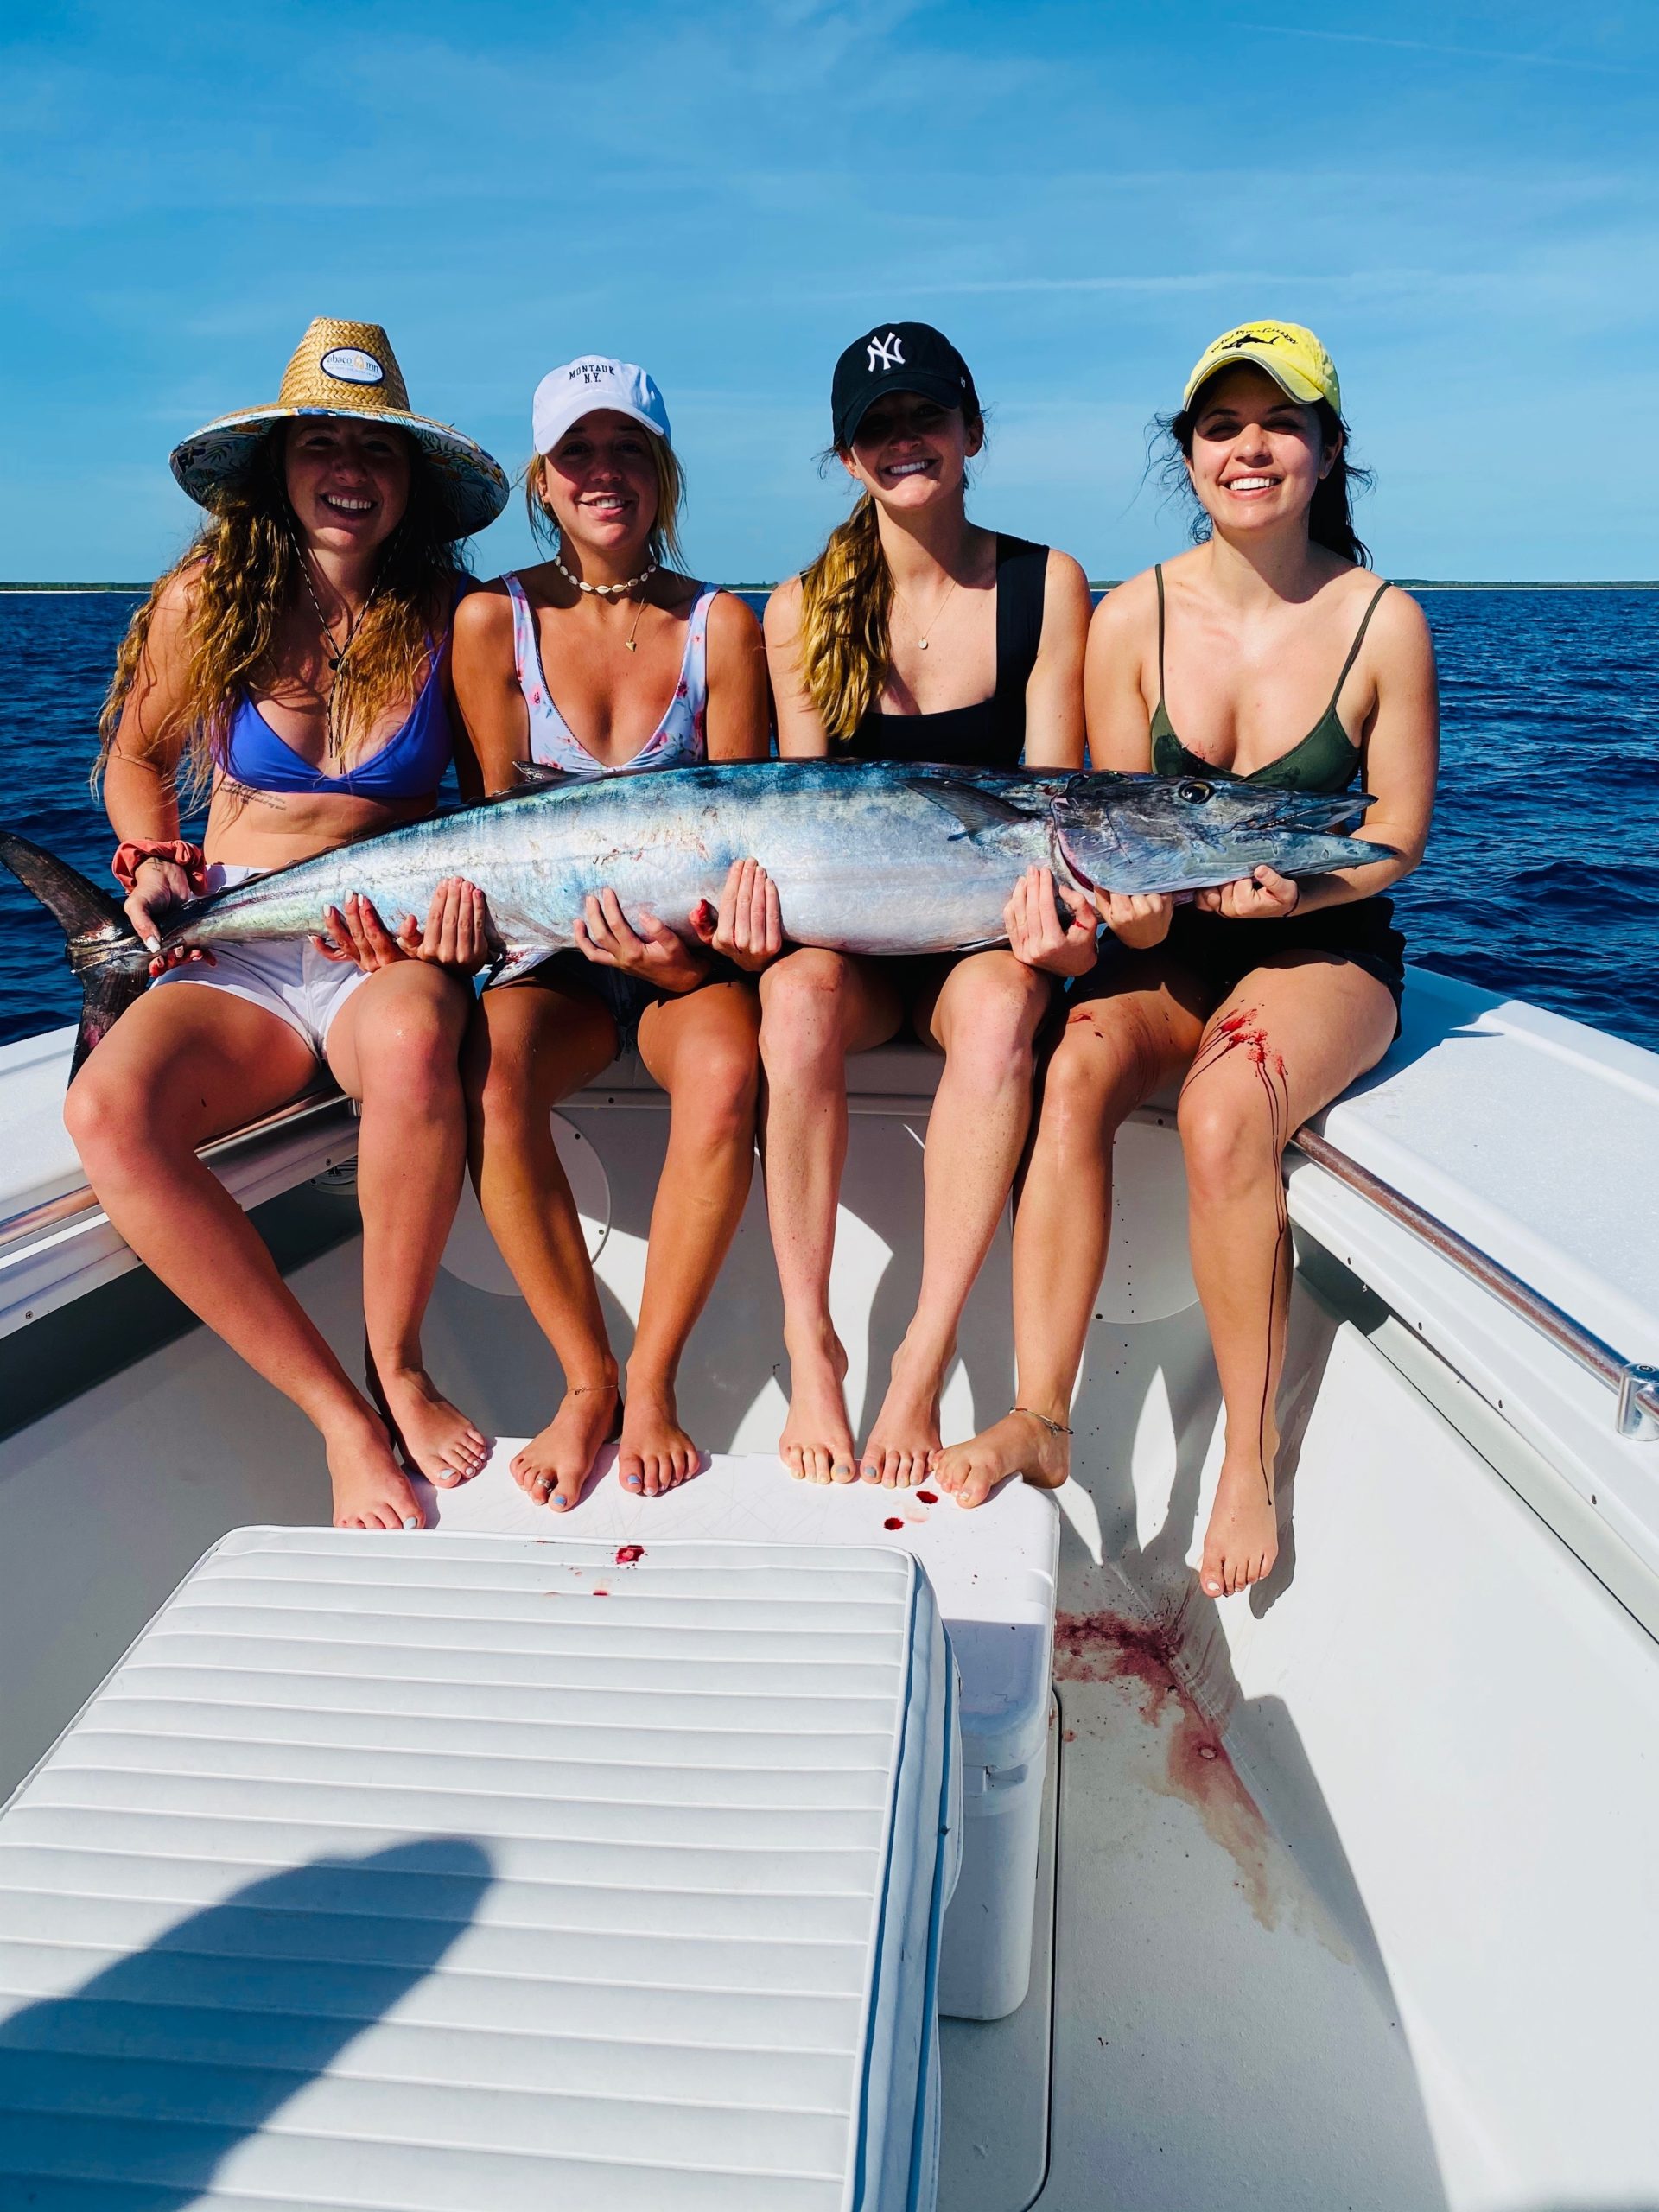 Jacqueline Shilen of Westhampton and Chessie Abplanalp of Montauk, along with Sophie and Hannah Rossitch, decked this big wahoo last week in the Bahamas.